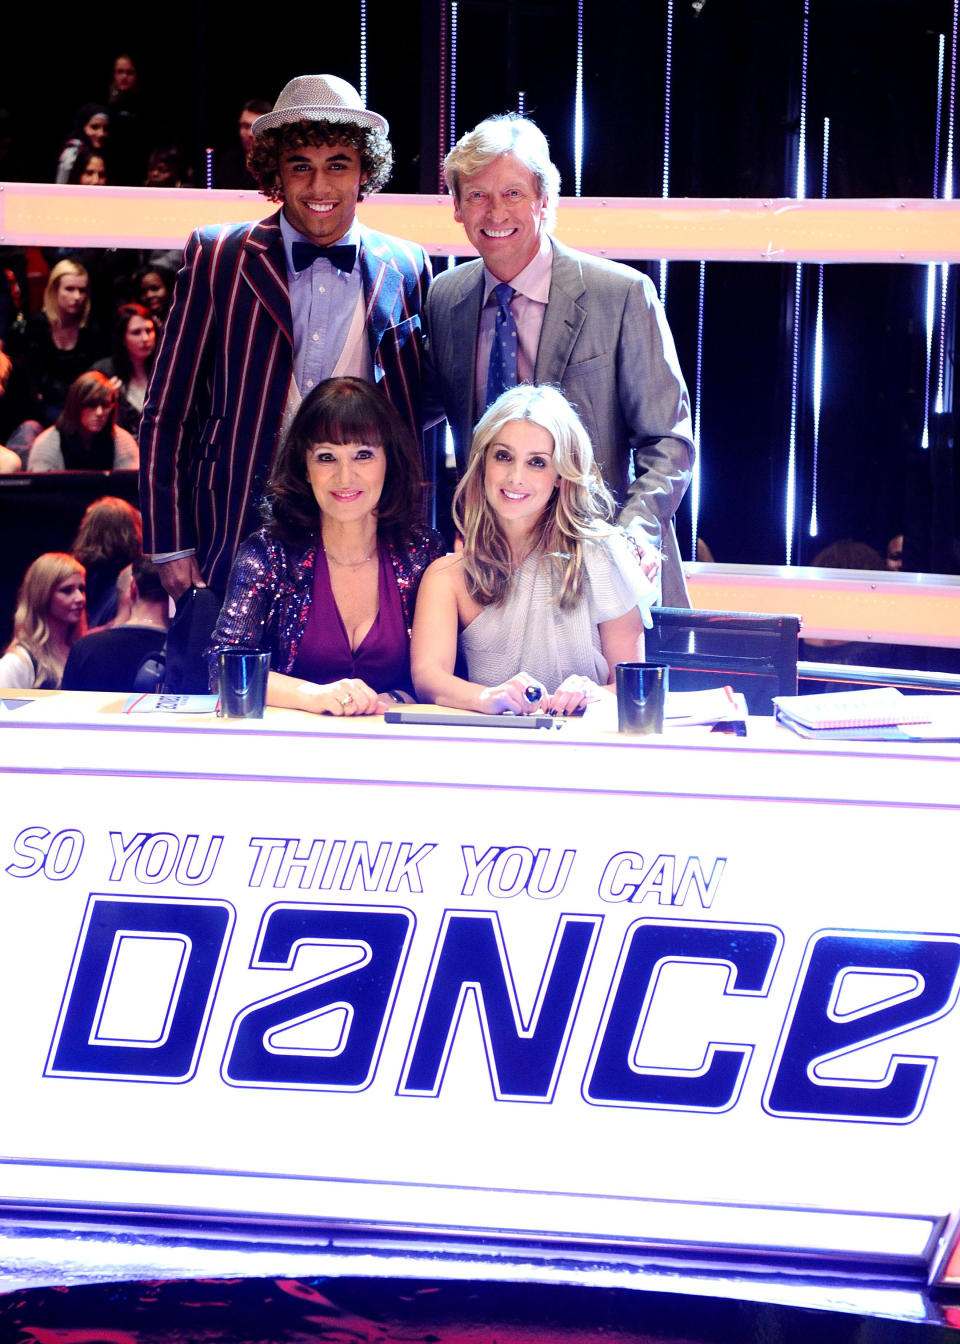 (left to right back row) Dance judges, Sisco Gomez and Nigel Lythgoe, front row left to right Arlene Phillips and Louise Redknapp, on the first live show of the BBC show, So You Think You Can Dance, at the BBC Studios in London.